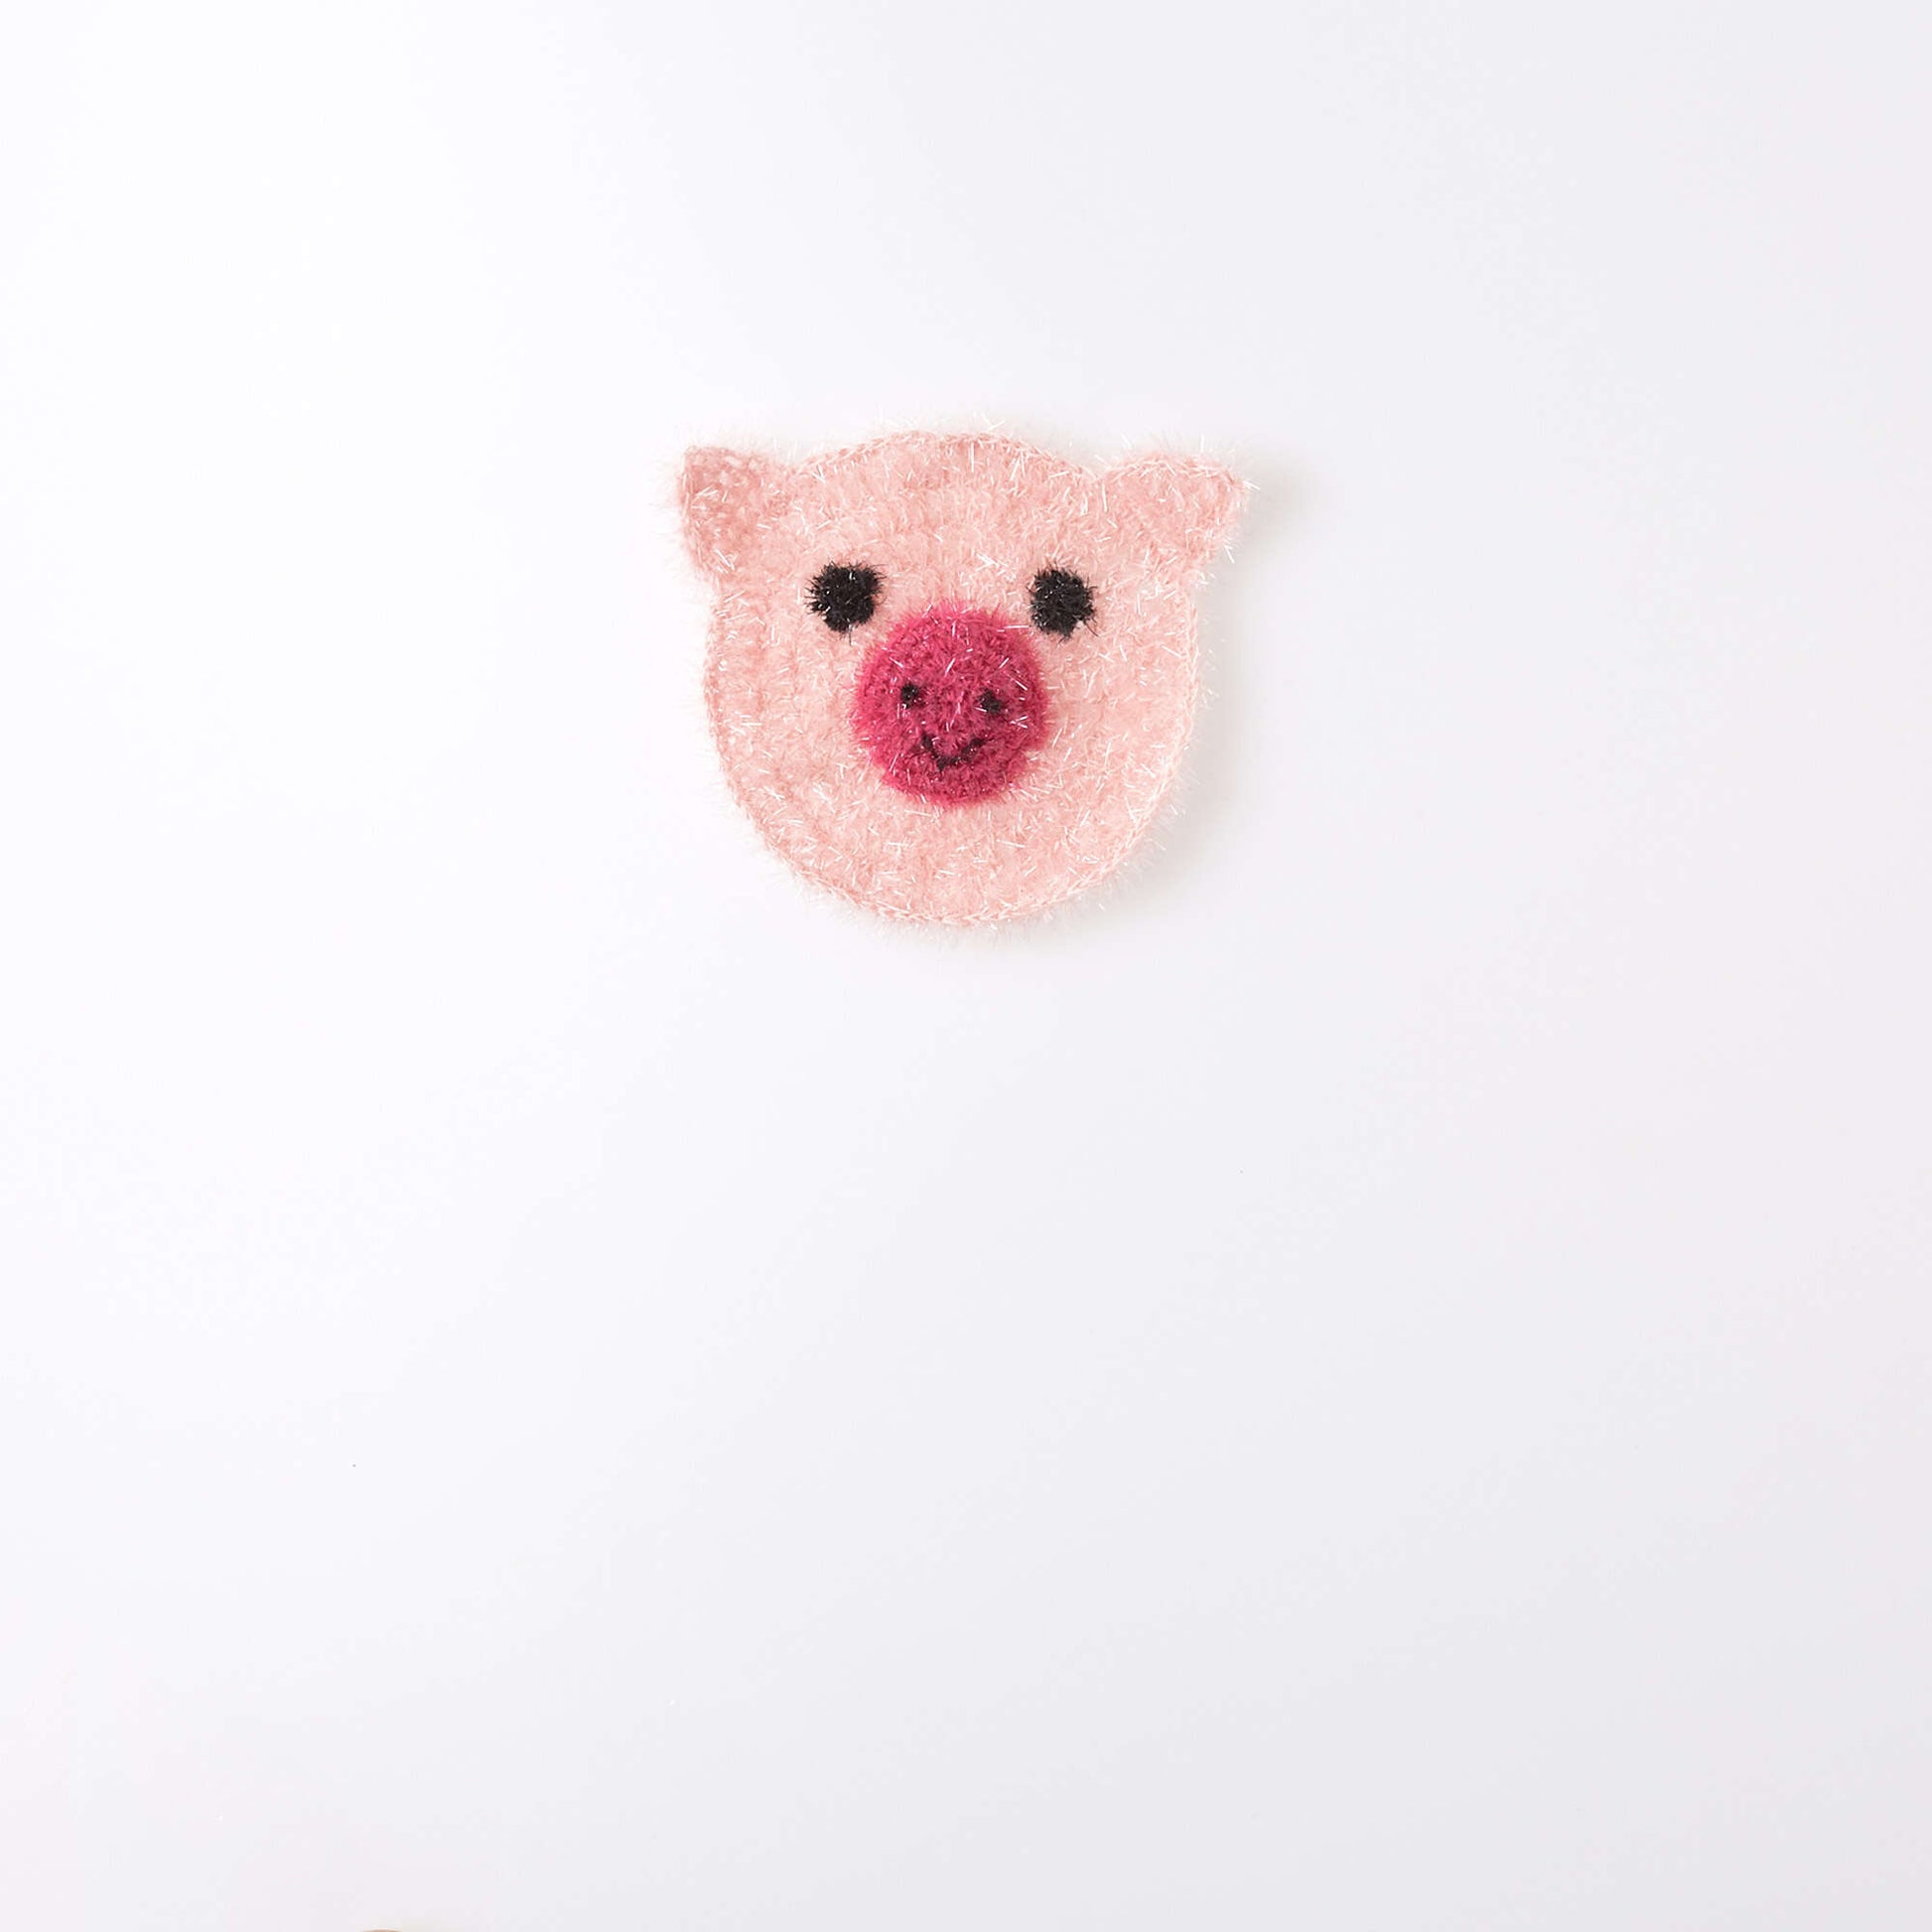 Free Red Heart Sparkle Pig Scrubby Crochet Pattern